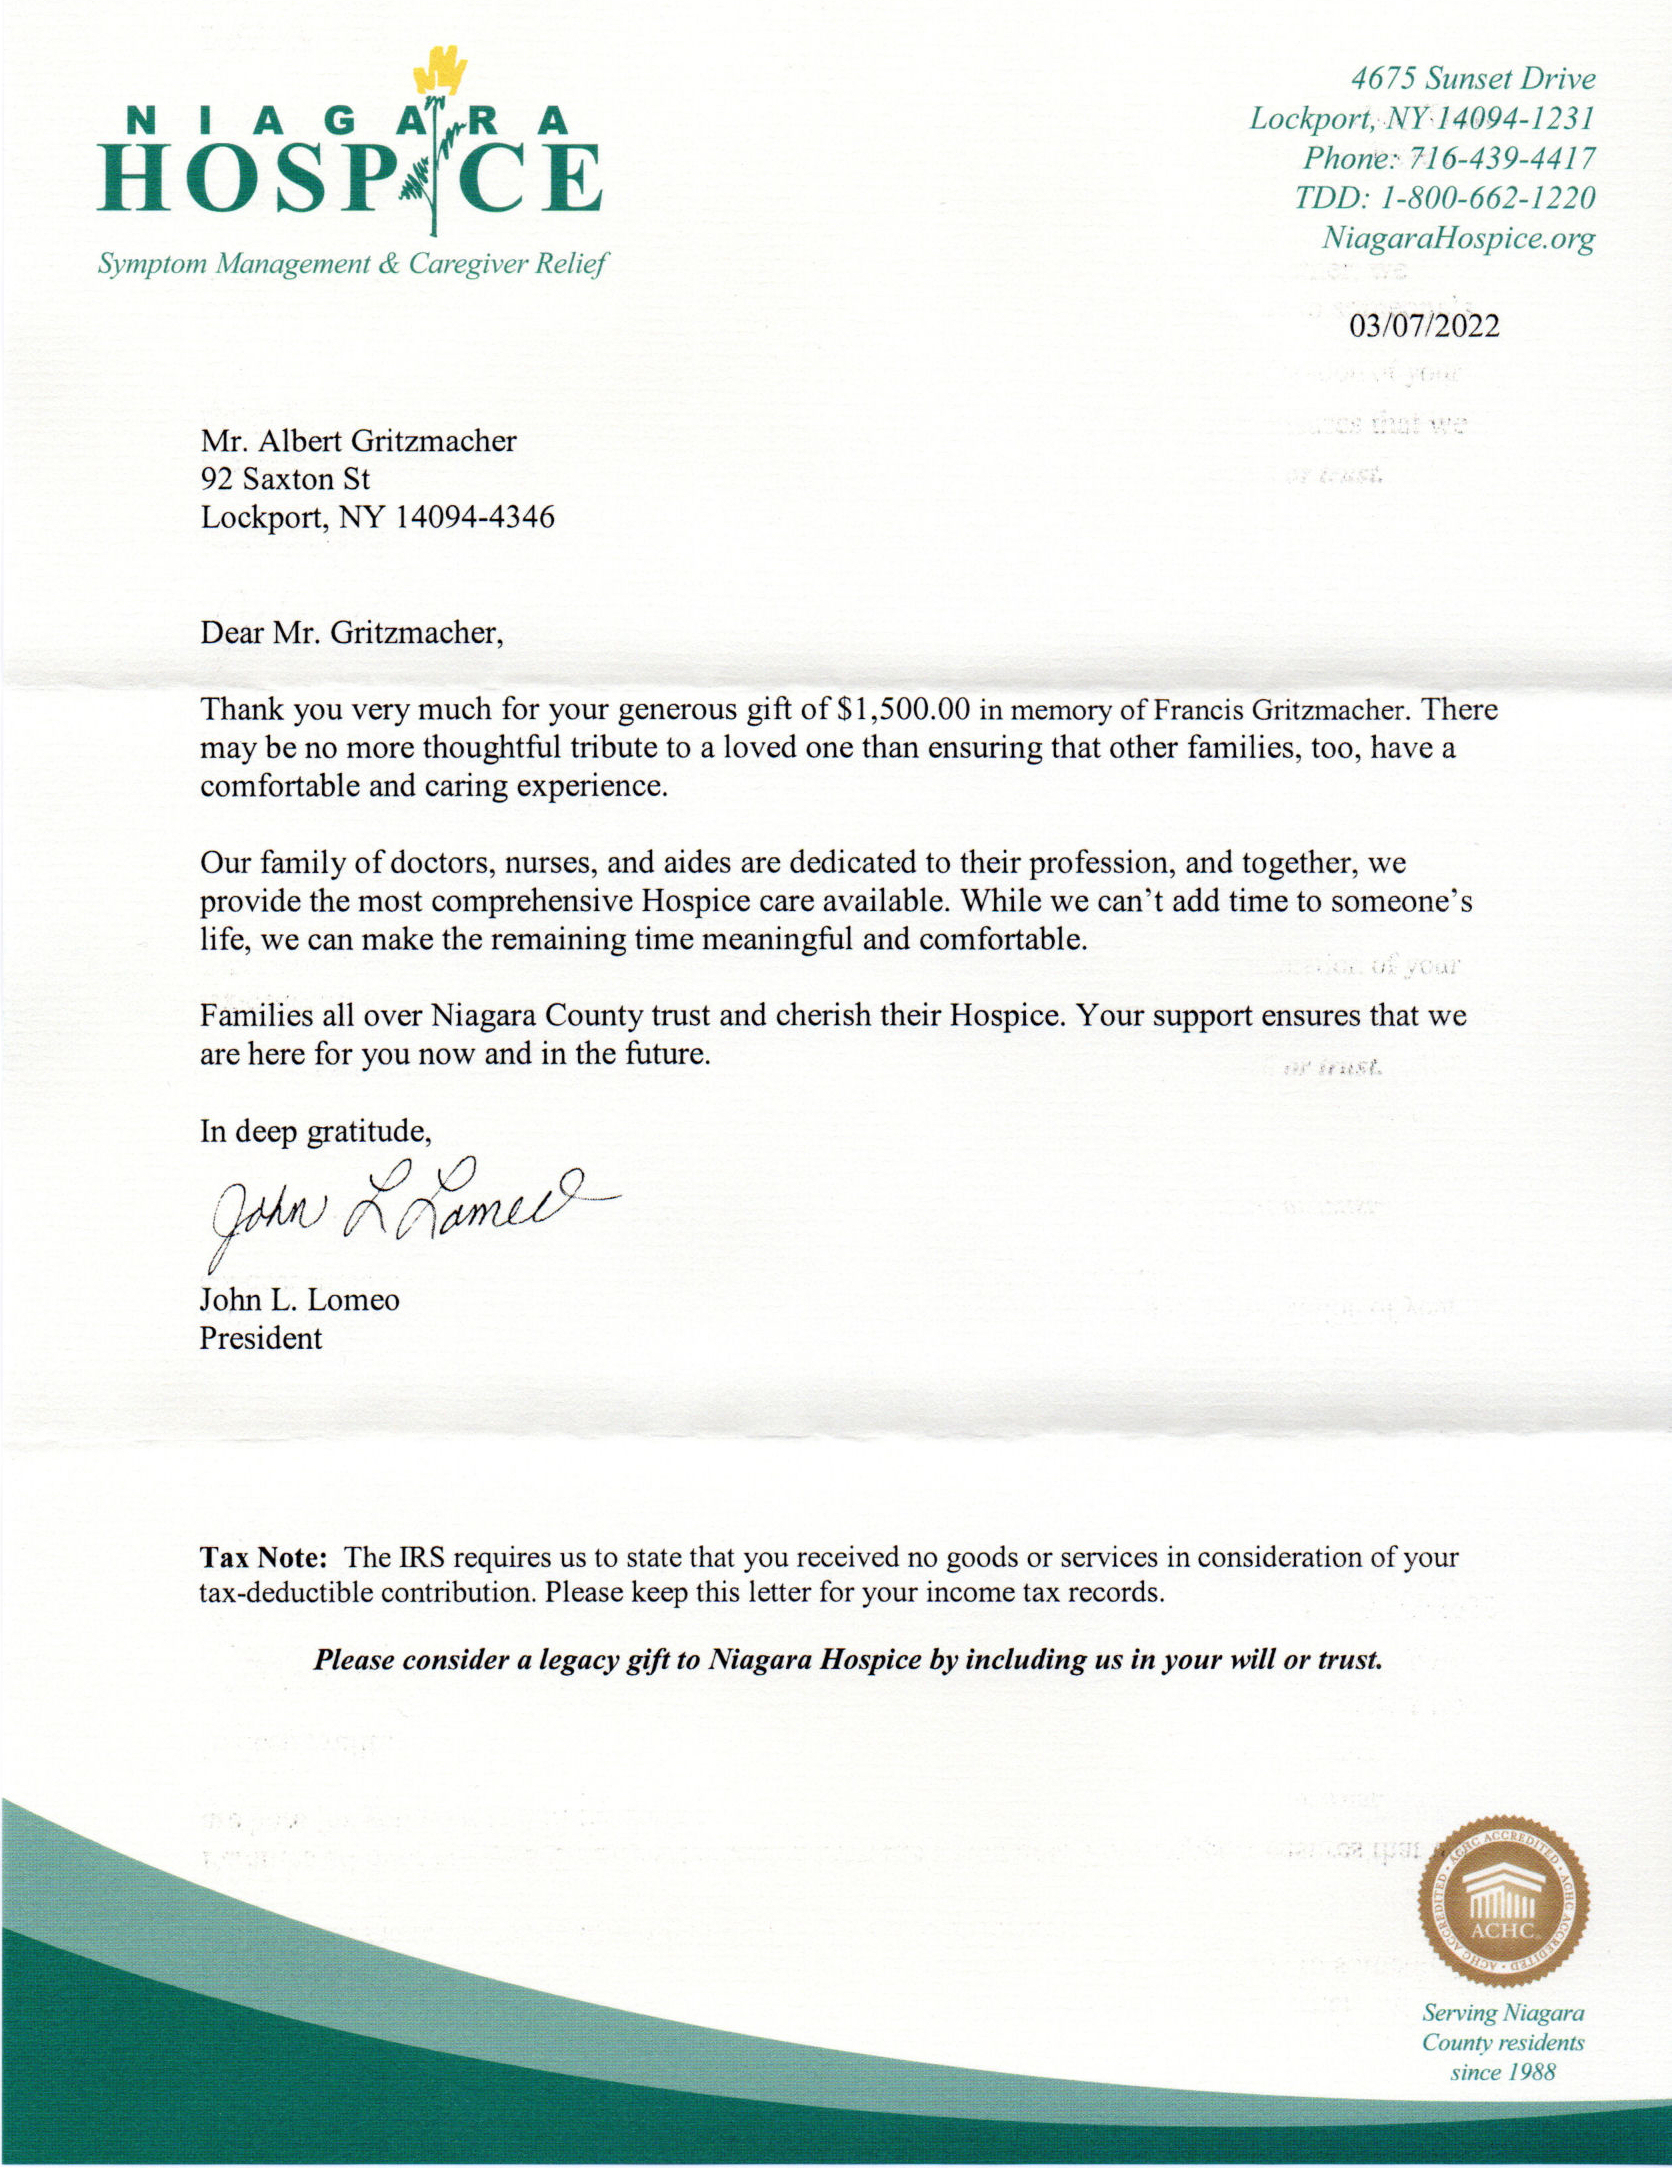 Thank you letter from Niagara Hospice